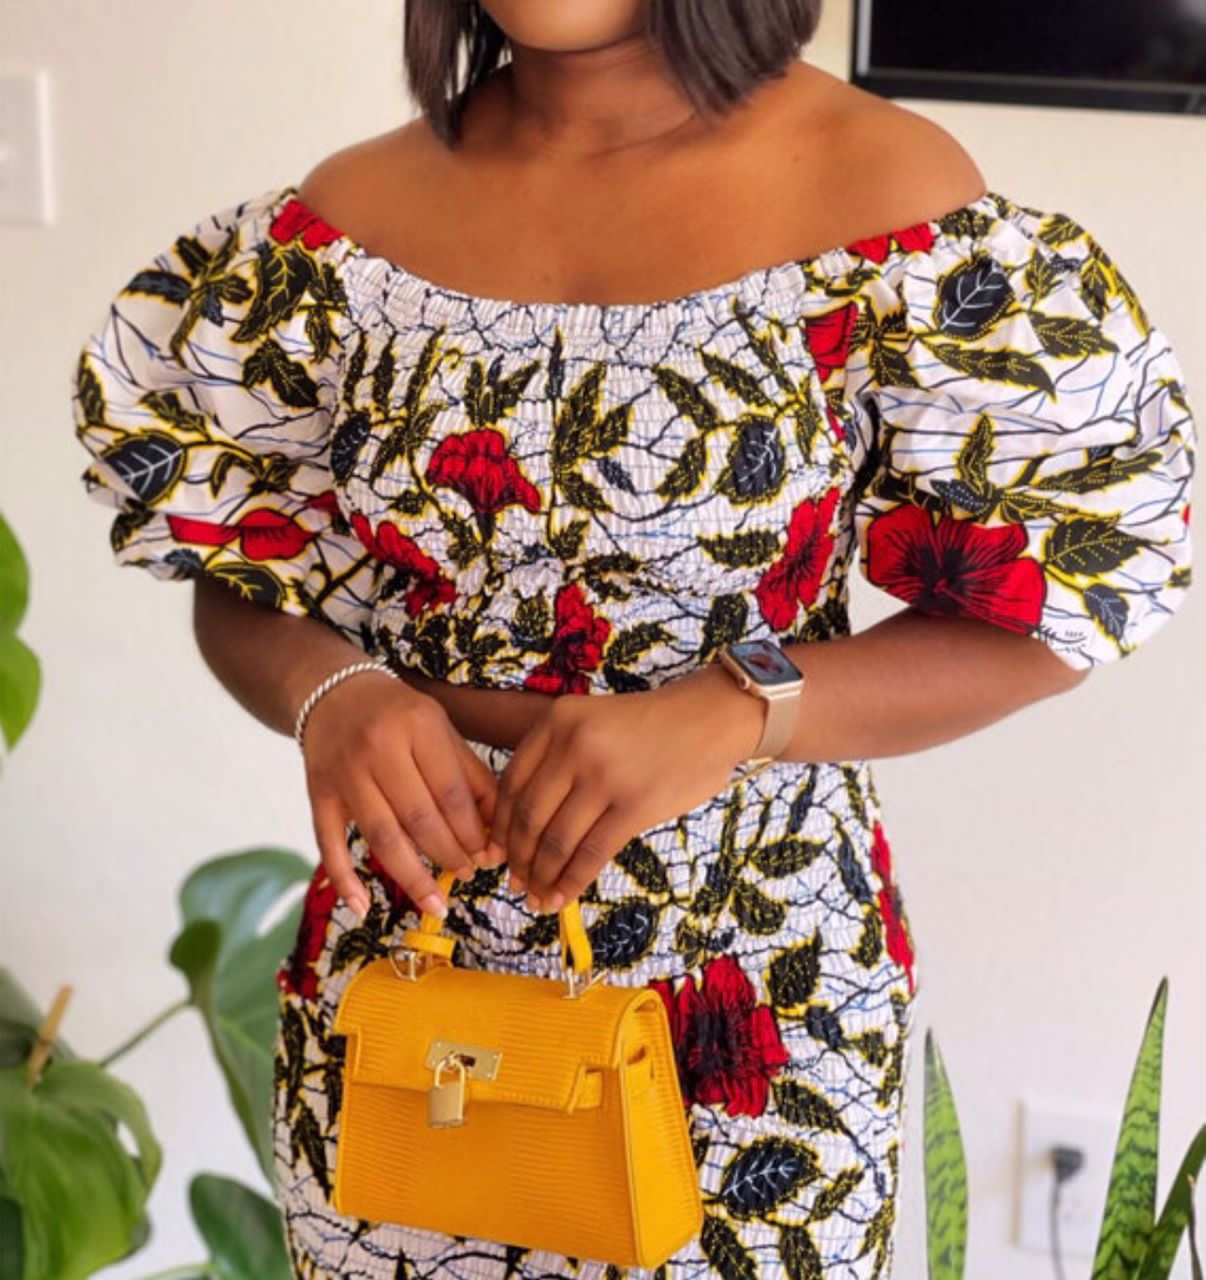 A stretchy two piece short skirt and a quarter sleeve puff hand top made with Ankara wax print/fabric designed with white, black gold and red beautiful 🌹colours and pattern 